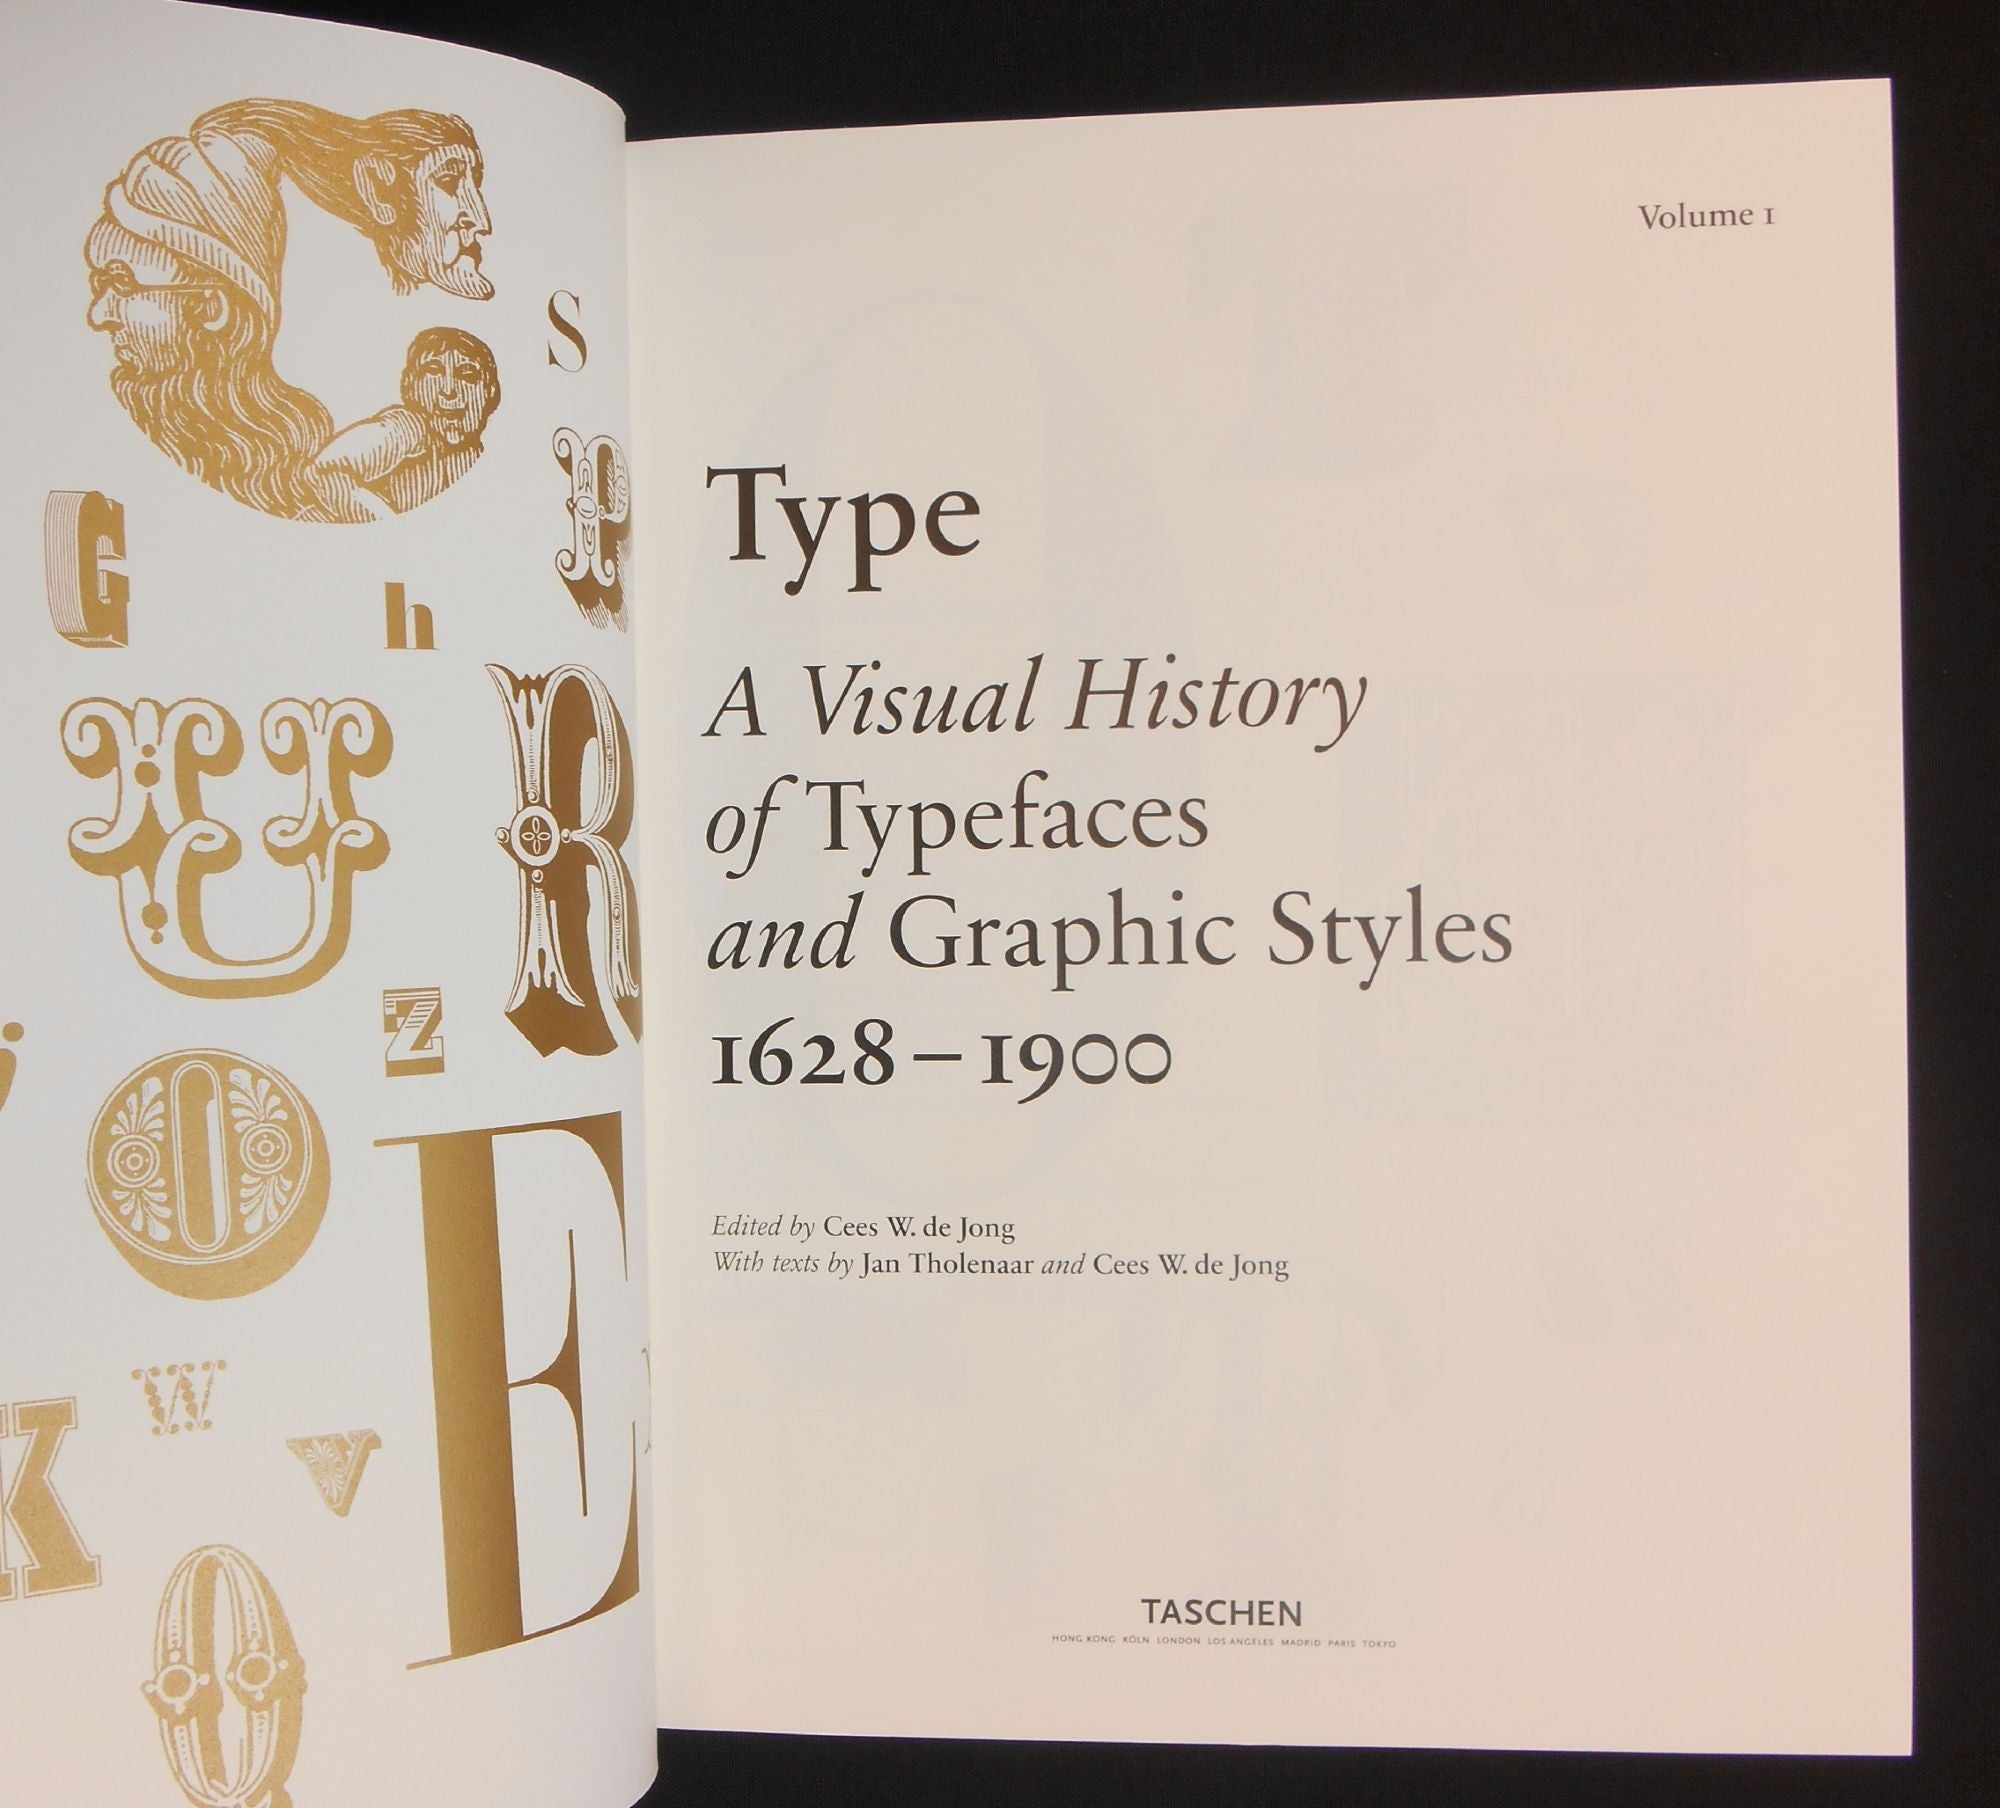 Type: A Visual History of Typefaces and Graphic Styles; Volume I, 1628-1900  by Cees W. de Jong, Jan Tholenaar Alston W. on Swan's Fine Books